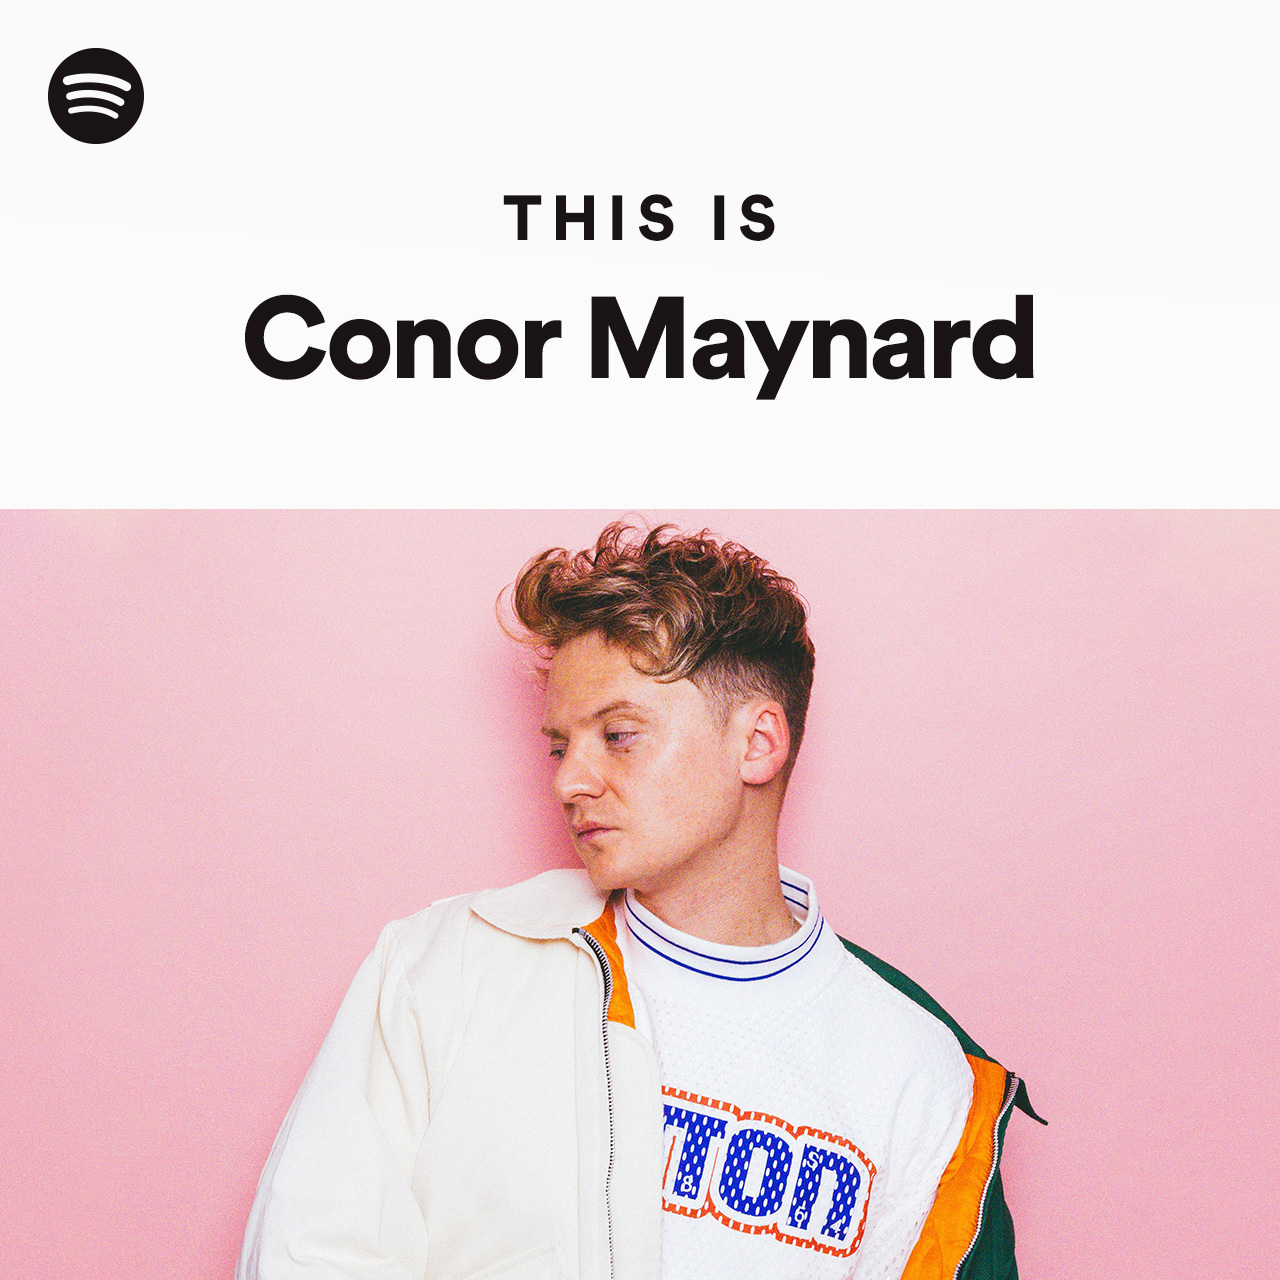 This Is Conor Maynard - playlist by Spotify | Spotify